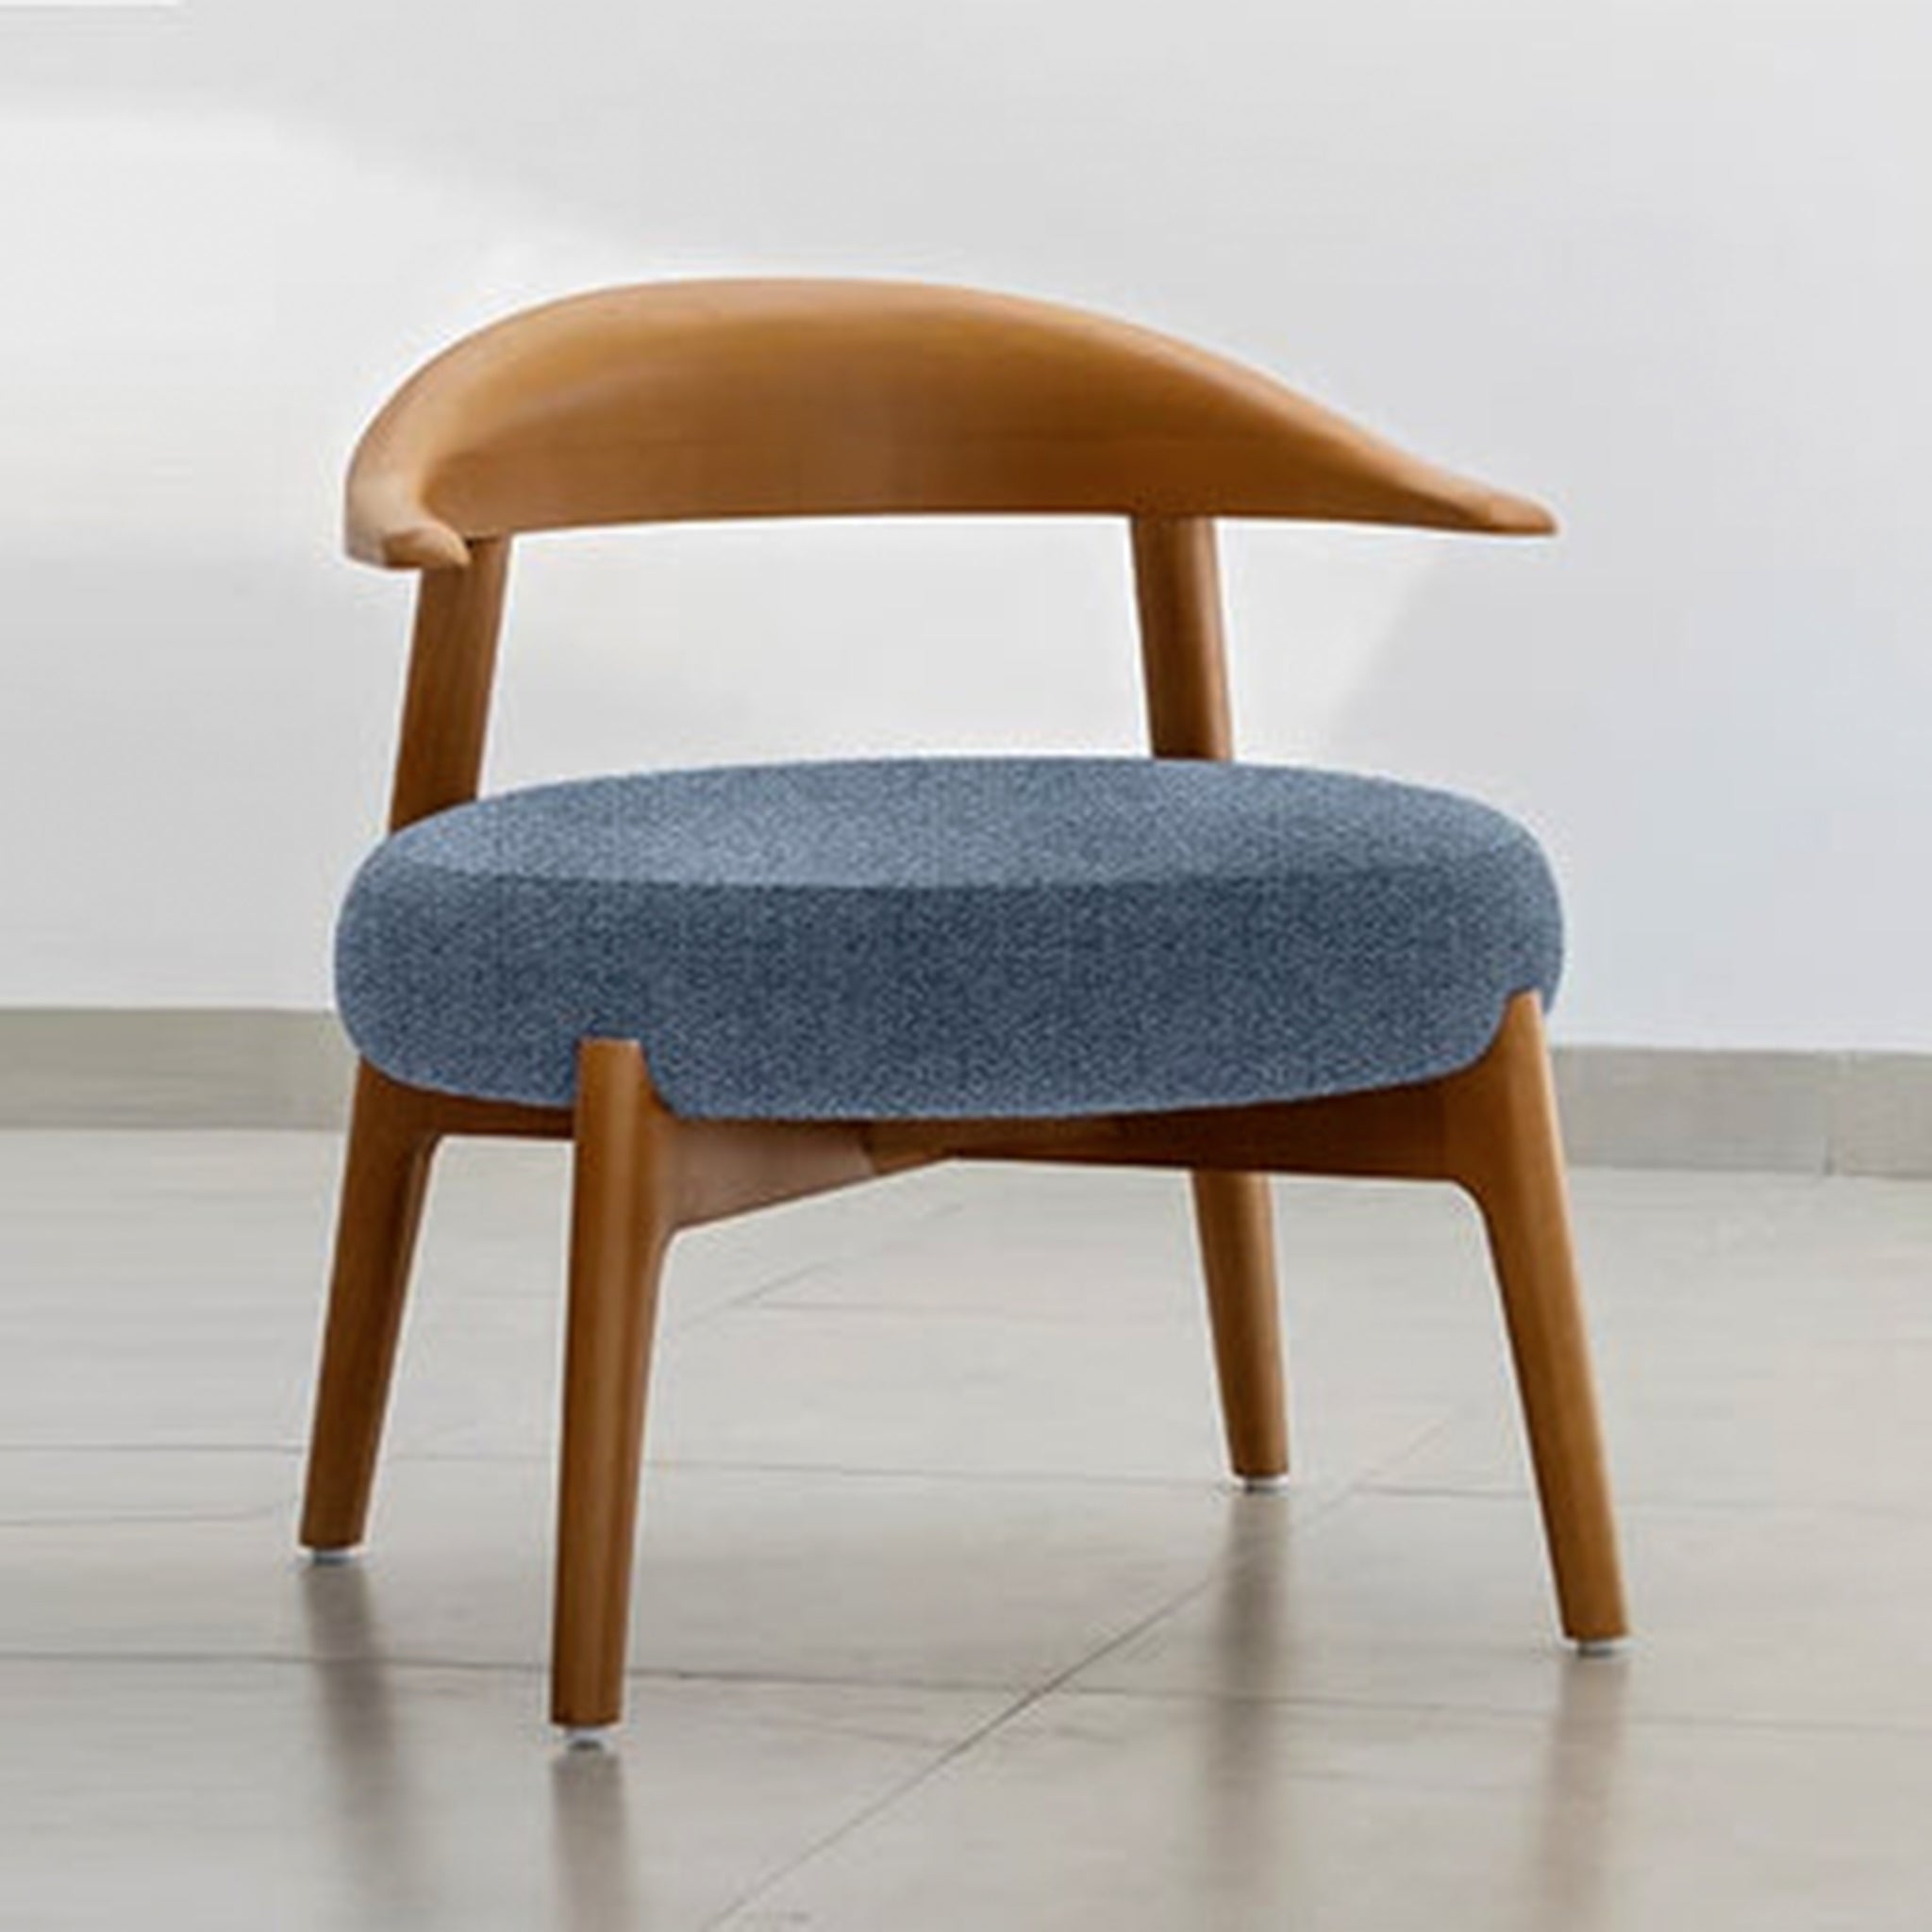 "The Hyde Accent Chair's mid-century design with modern comfort"